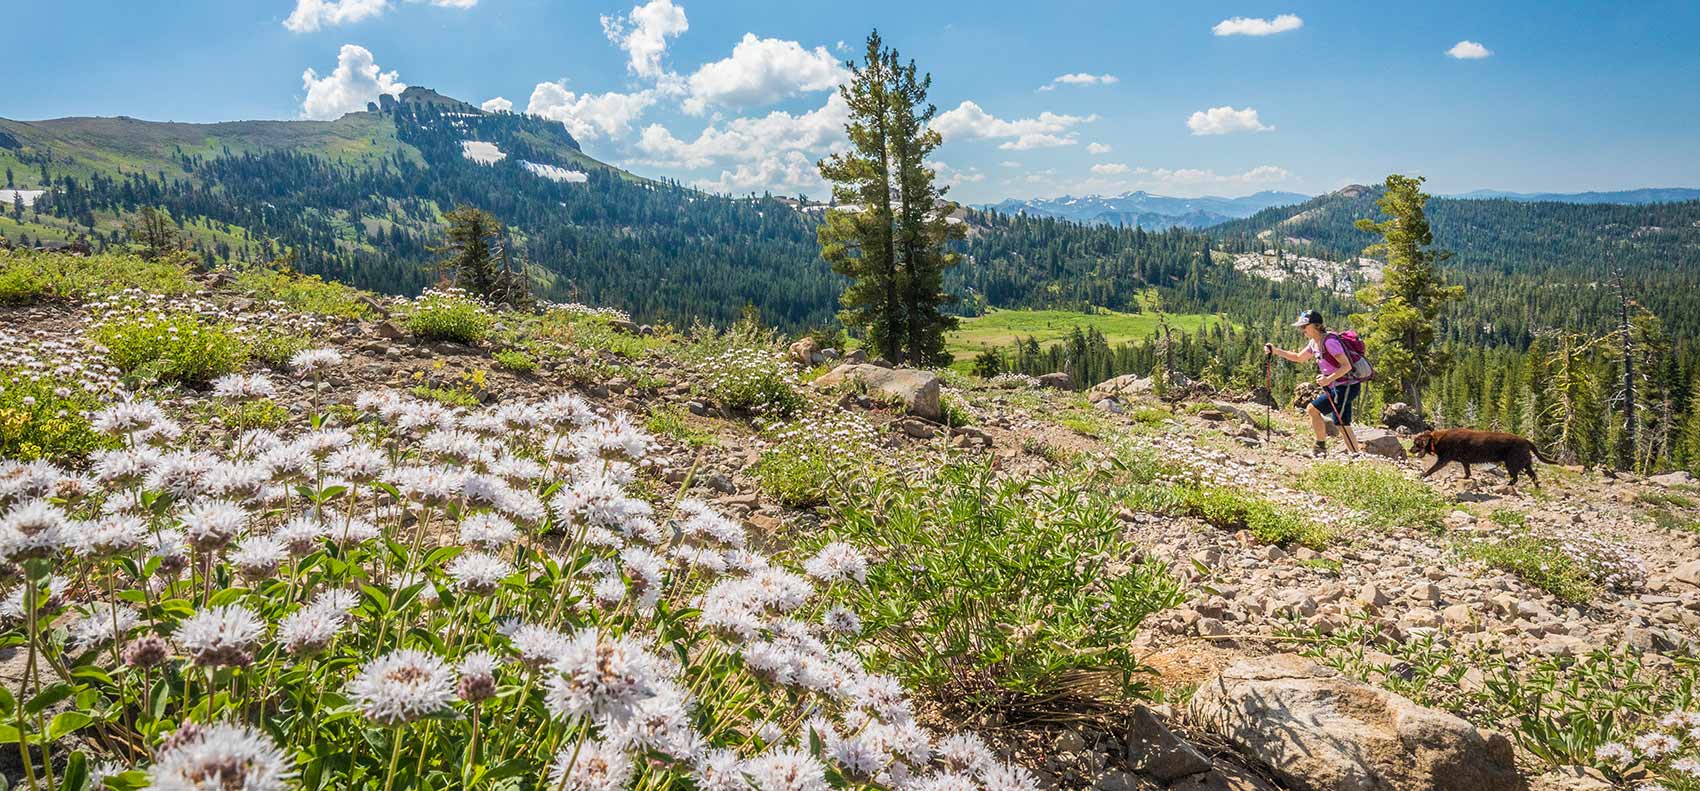 Hiker with dog on trail in Sierra with beautiful spring flowers